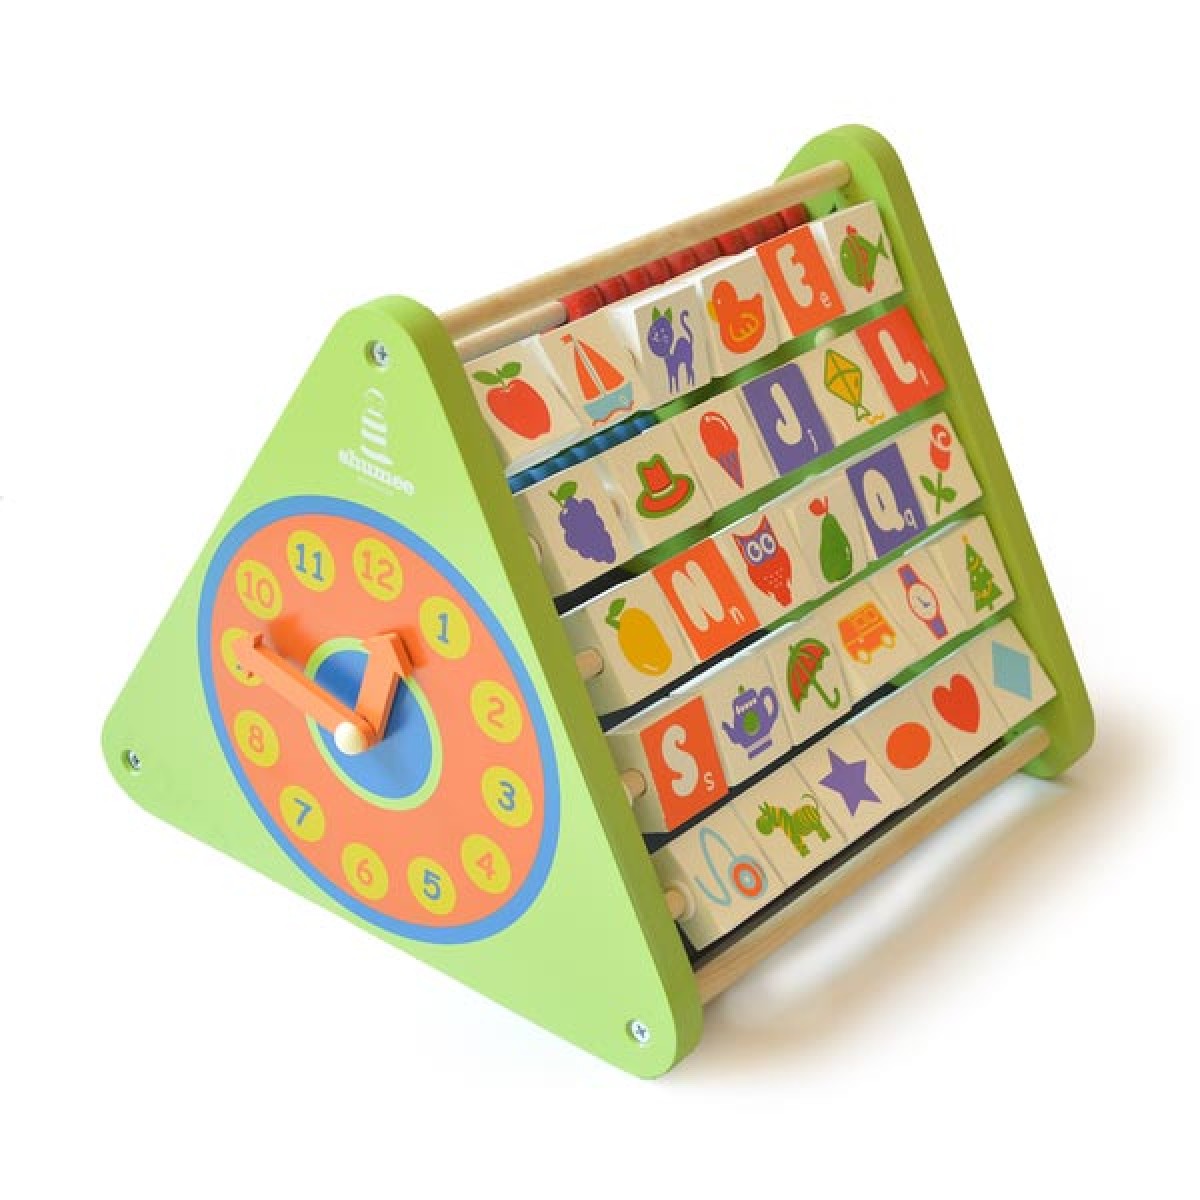 A Five-Sided Wooden Shumee Activity Triangle That Promises Hours Of Fun For Toddlers As They Explore The Alphabet, Numbers, Patterns, And More.